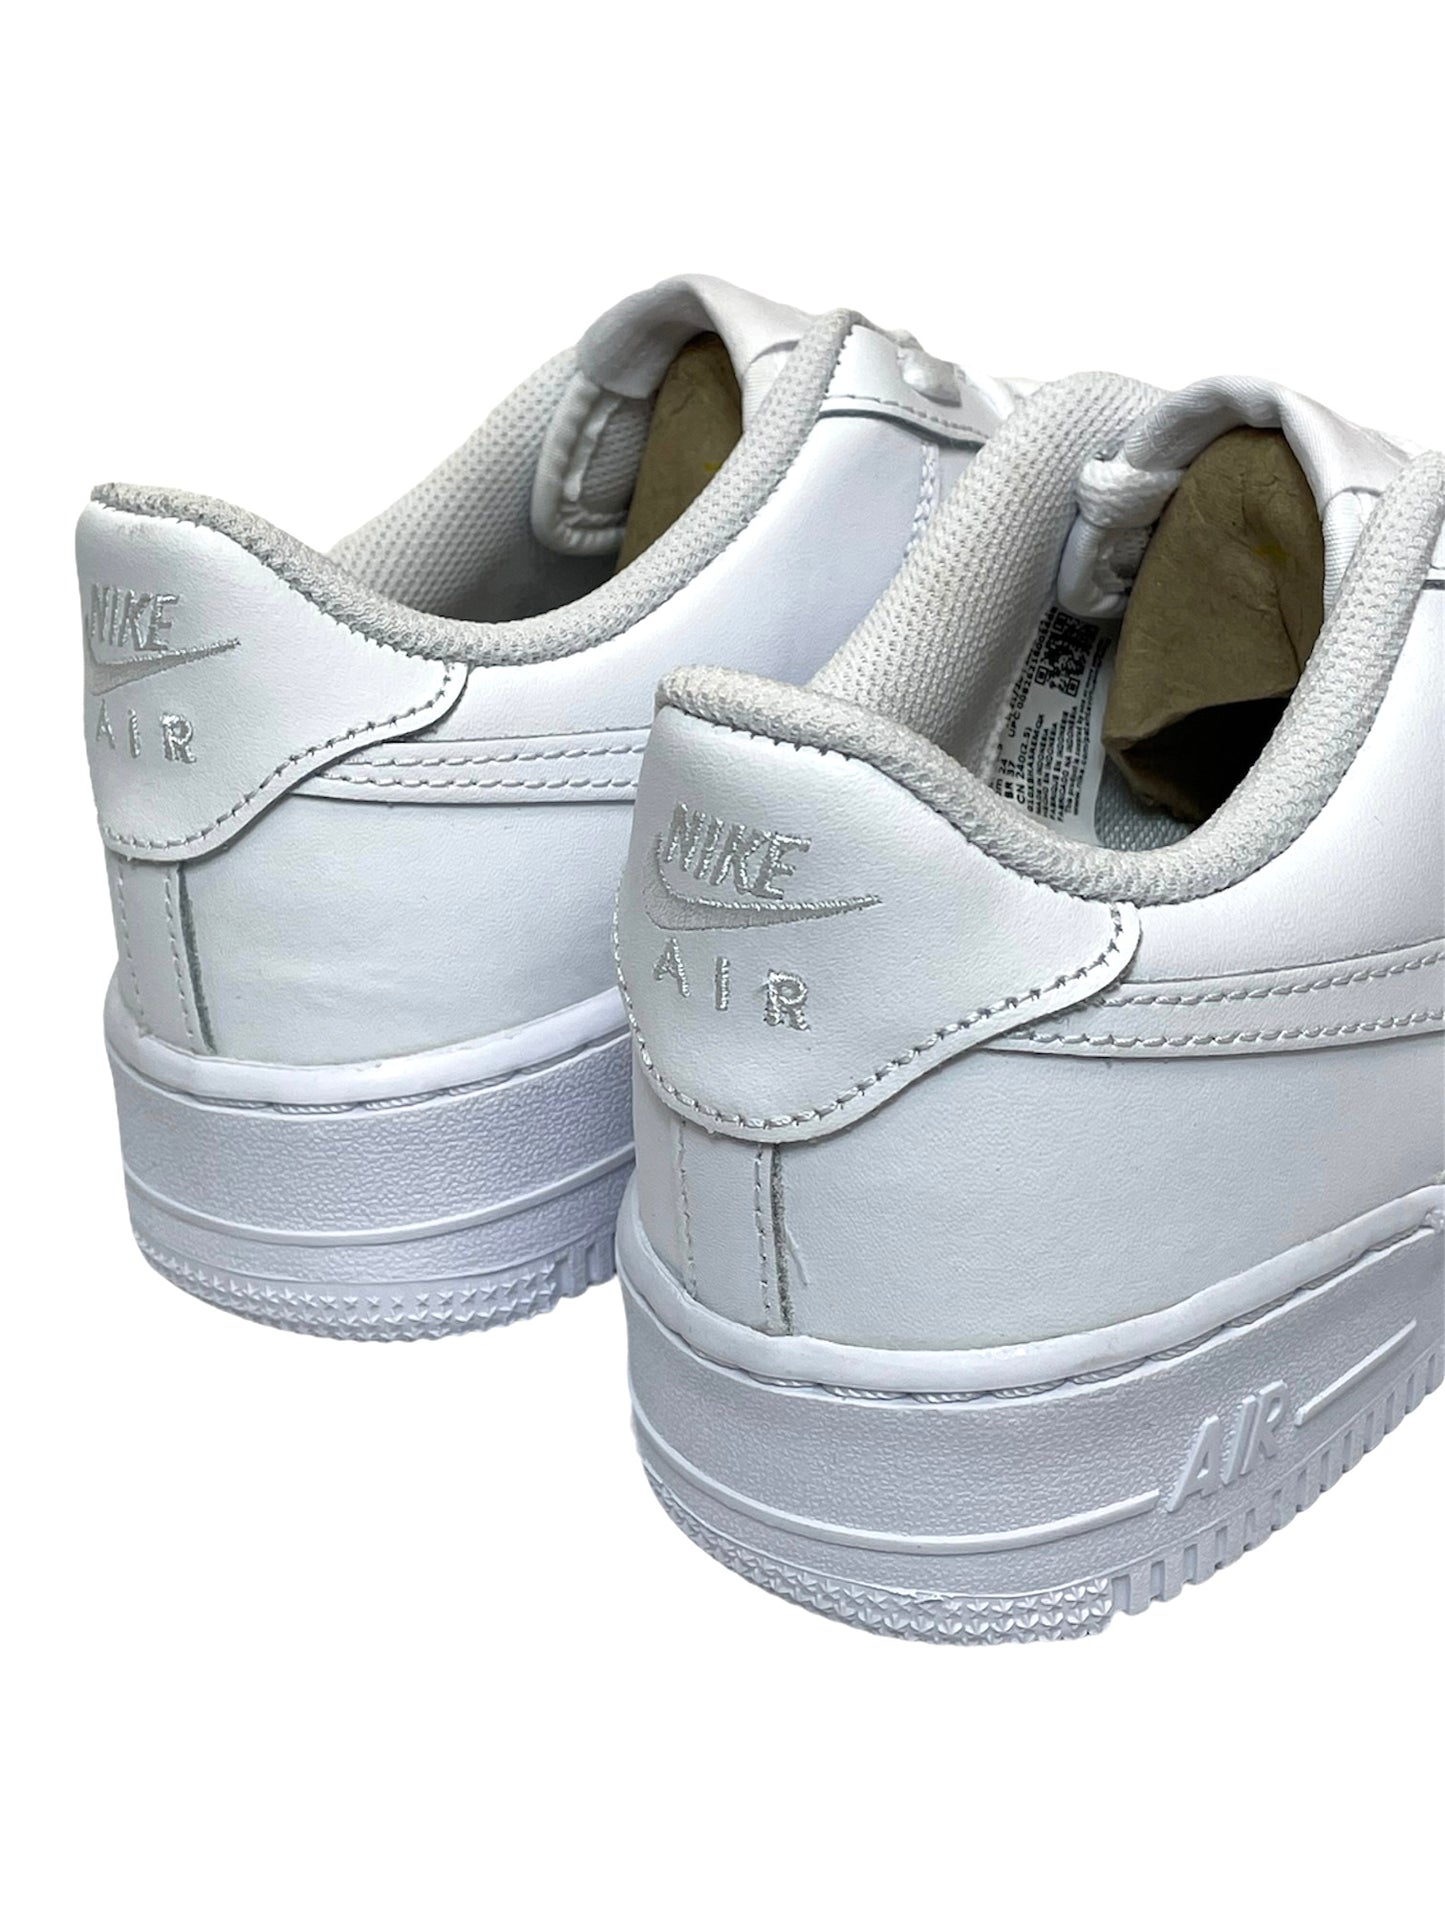 Nike Air Force 1 Low Women’s Trainers White